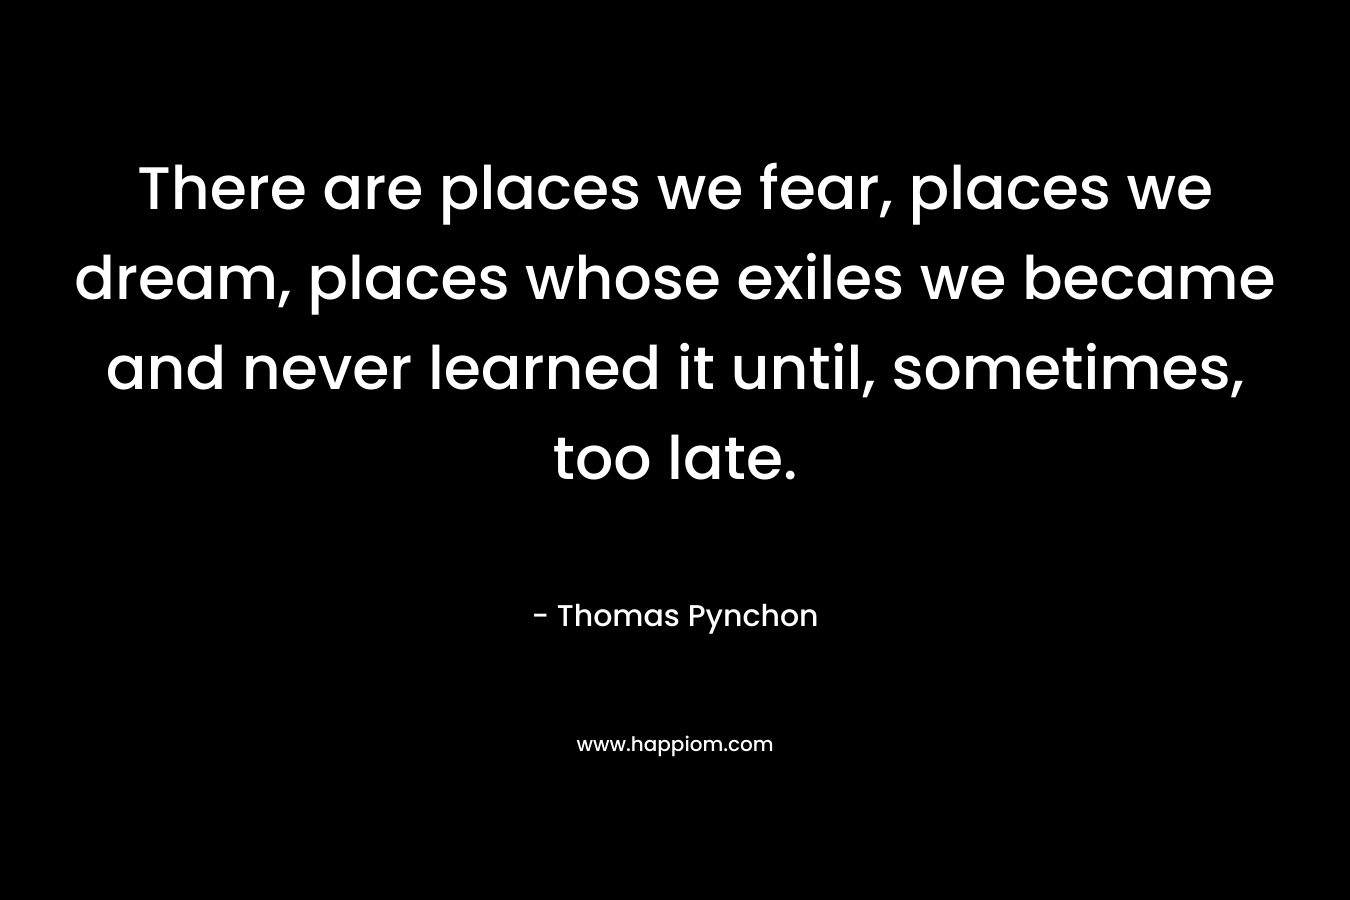 There are places we fear, places we dream, places whose exiles we became and never learned it until, sometimes, too late.